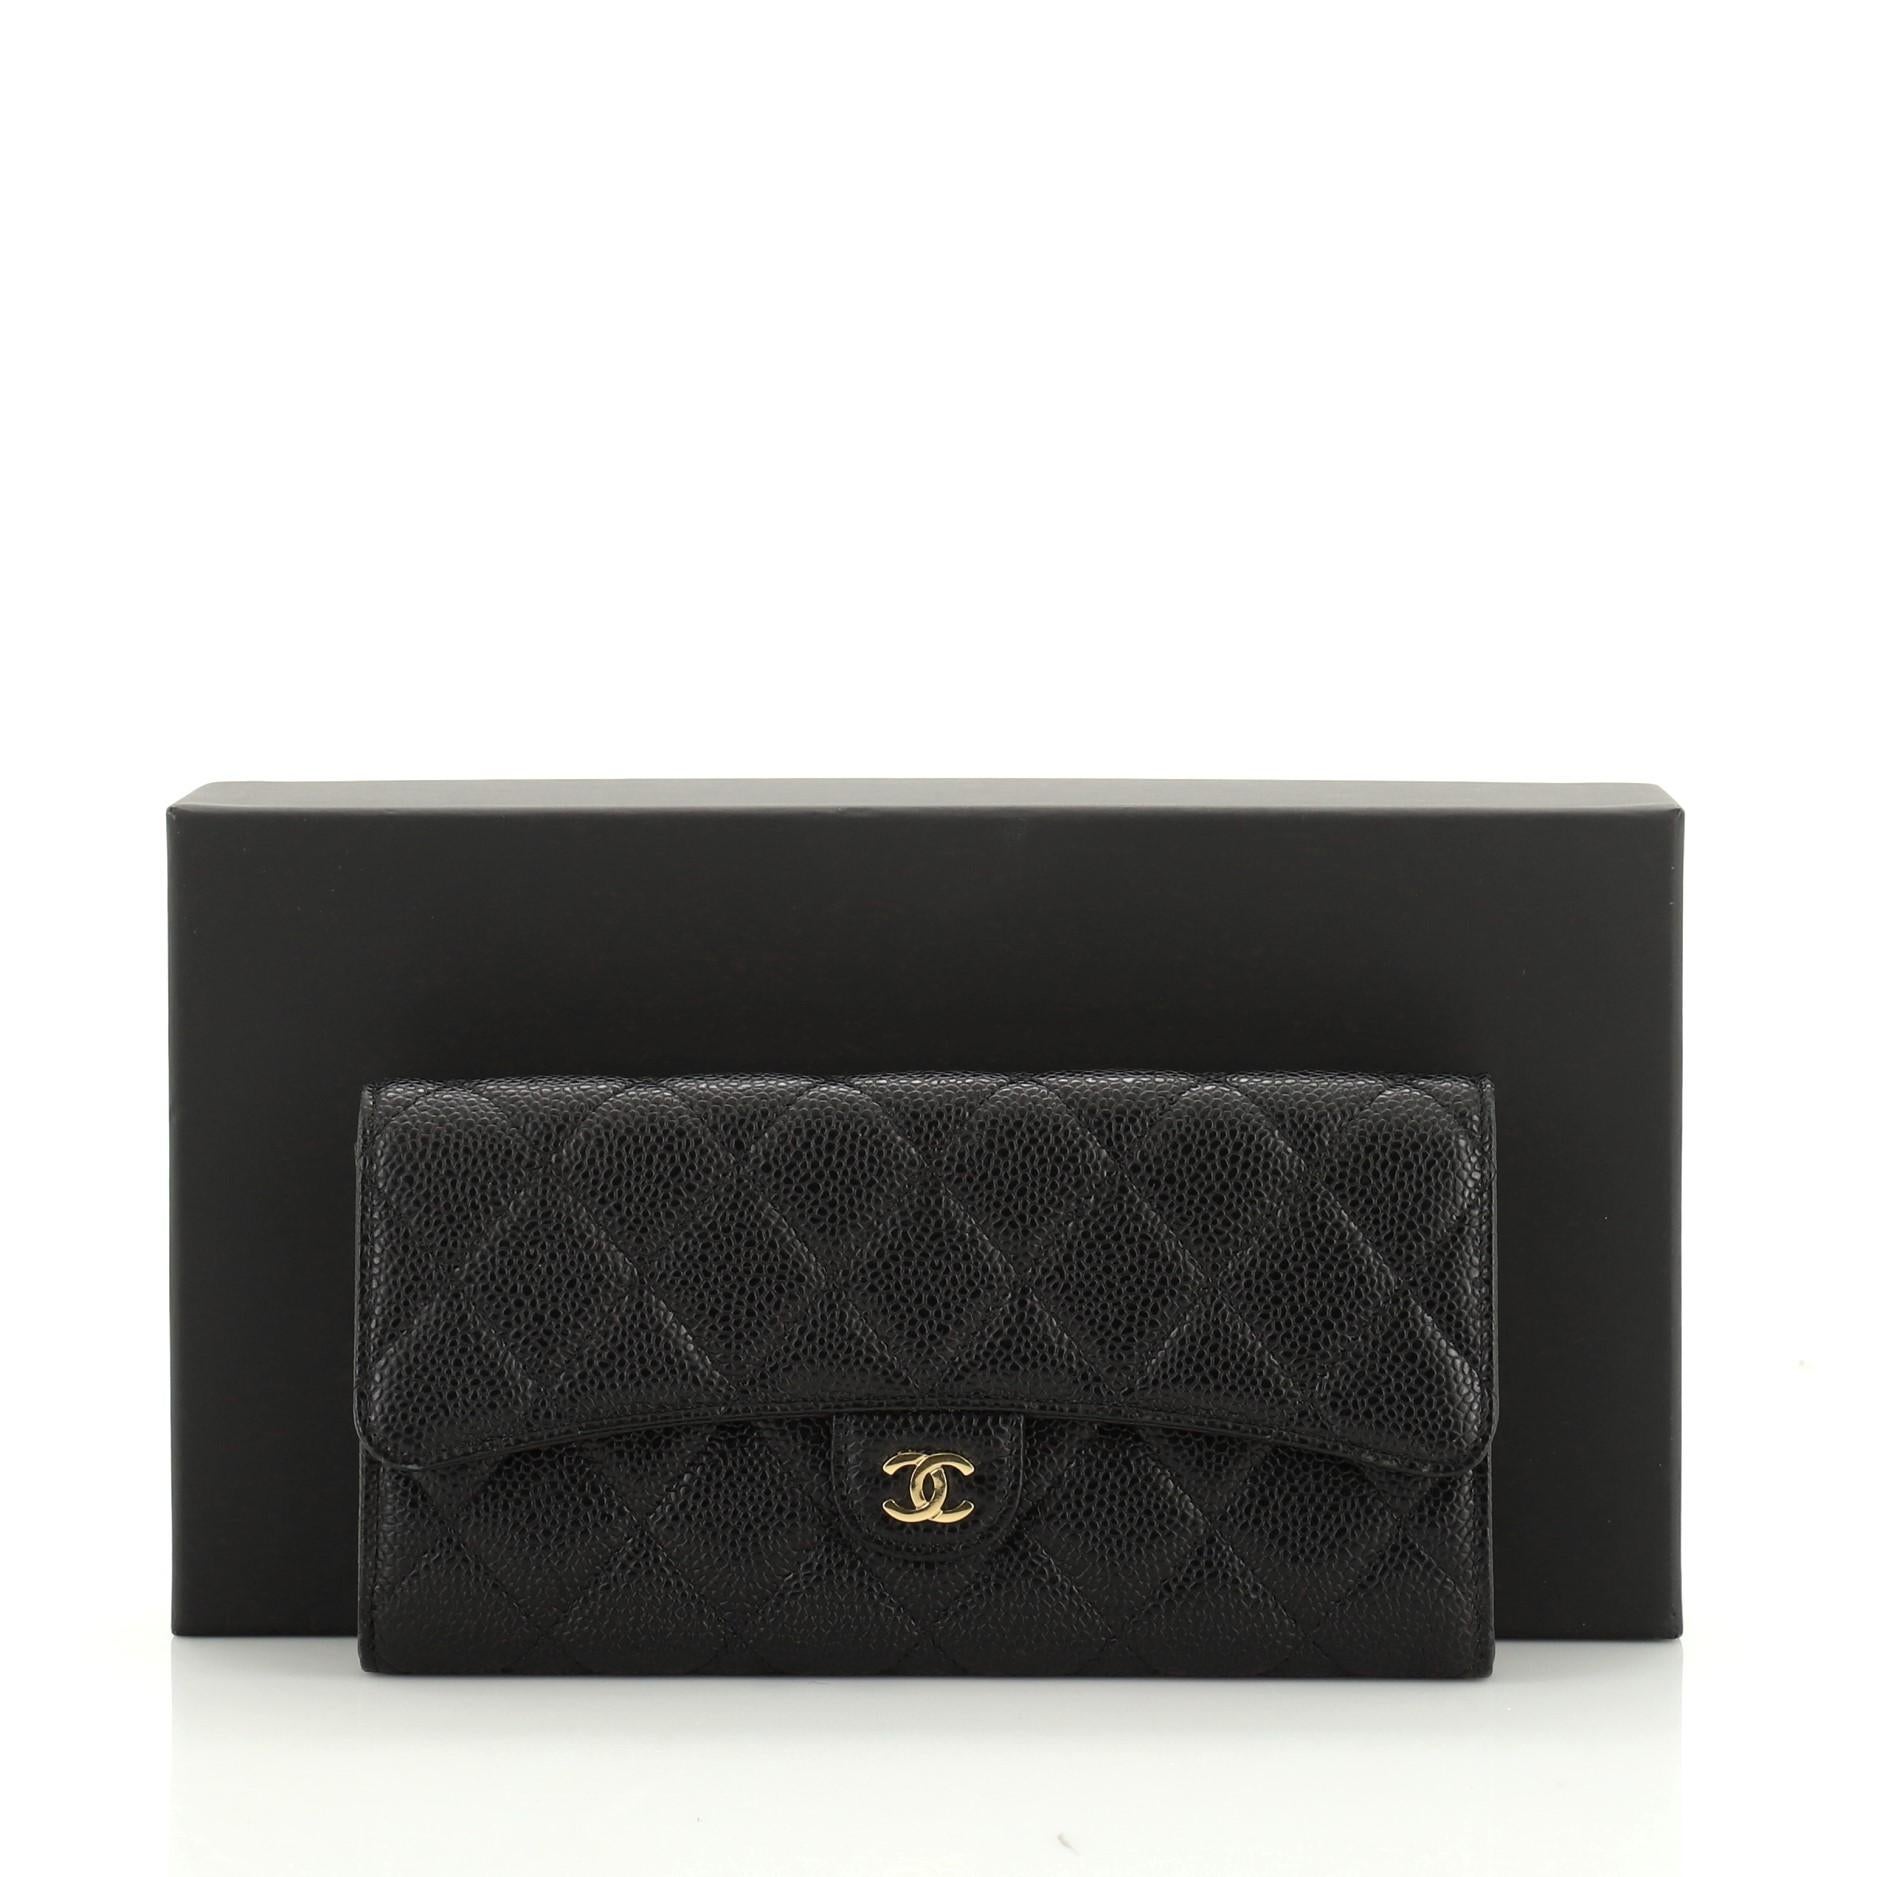 This Chanel CC Gusset Classic Flap Wallet Quilted Caviar Long, crafted from black quilted caviar leather, features interlocking CC logo, gusseted sides, and gold-tone hardware. Its snap button closure opens to a red fabric interior with multiple